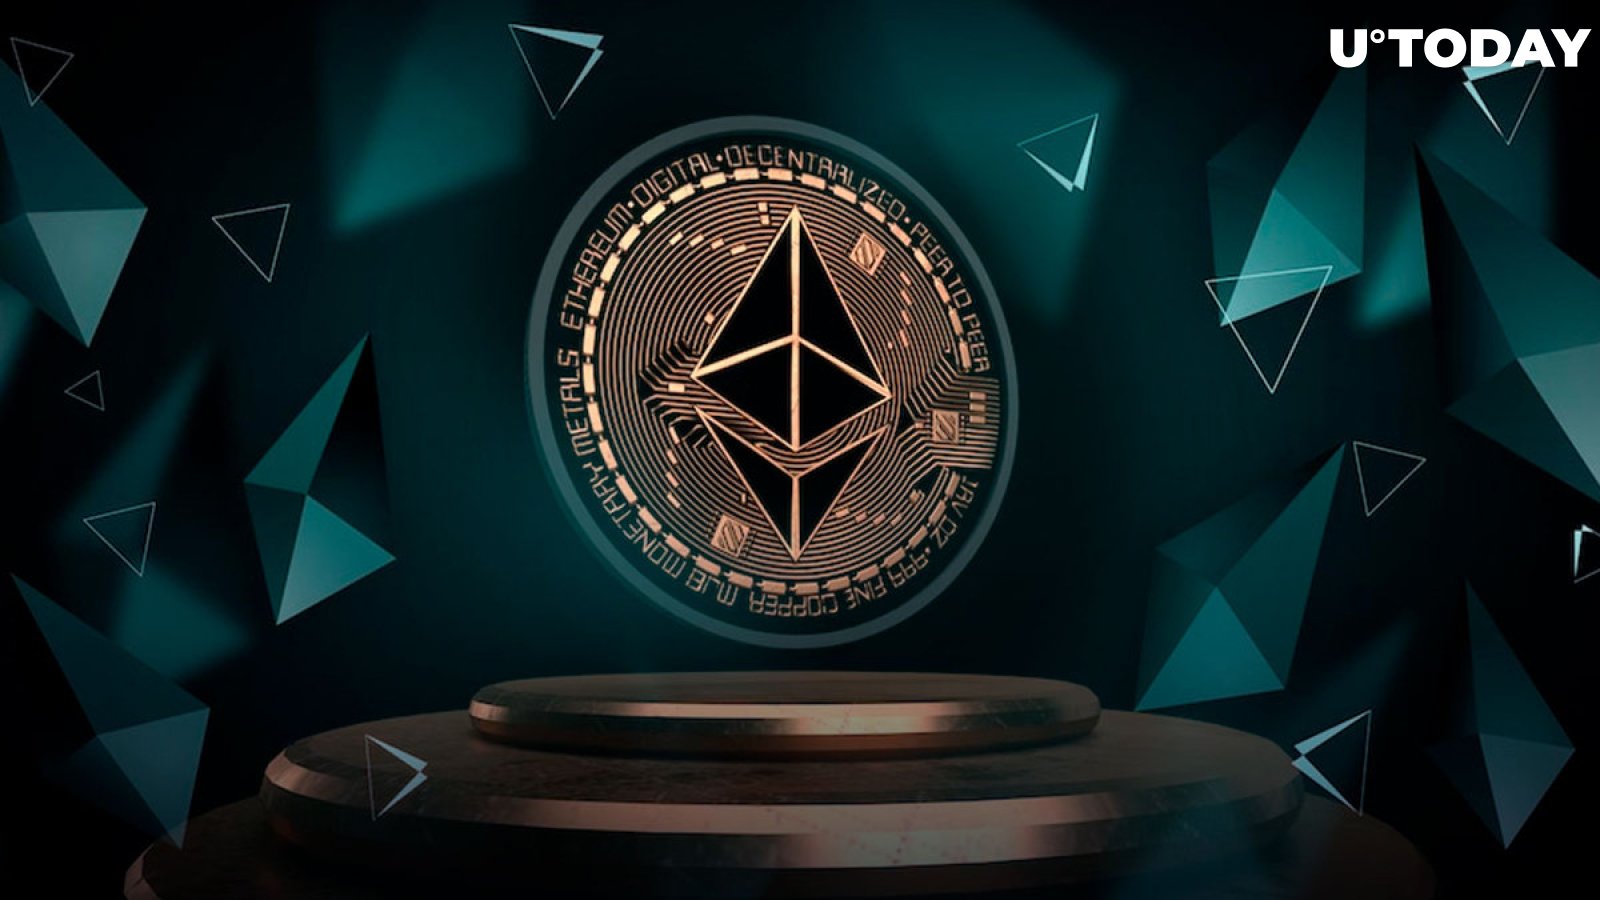 Ethereum (ETH) Pre-Merge Excitement Can Be Dangerous for Market, Here's Why